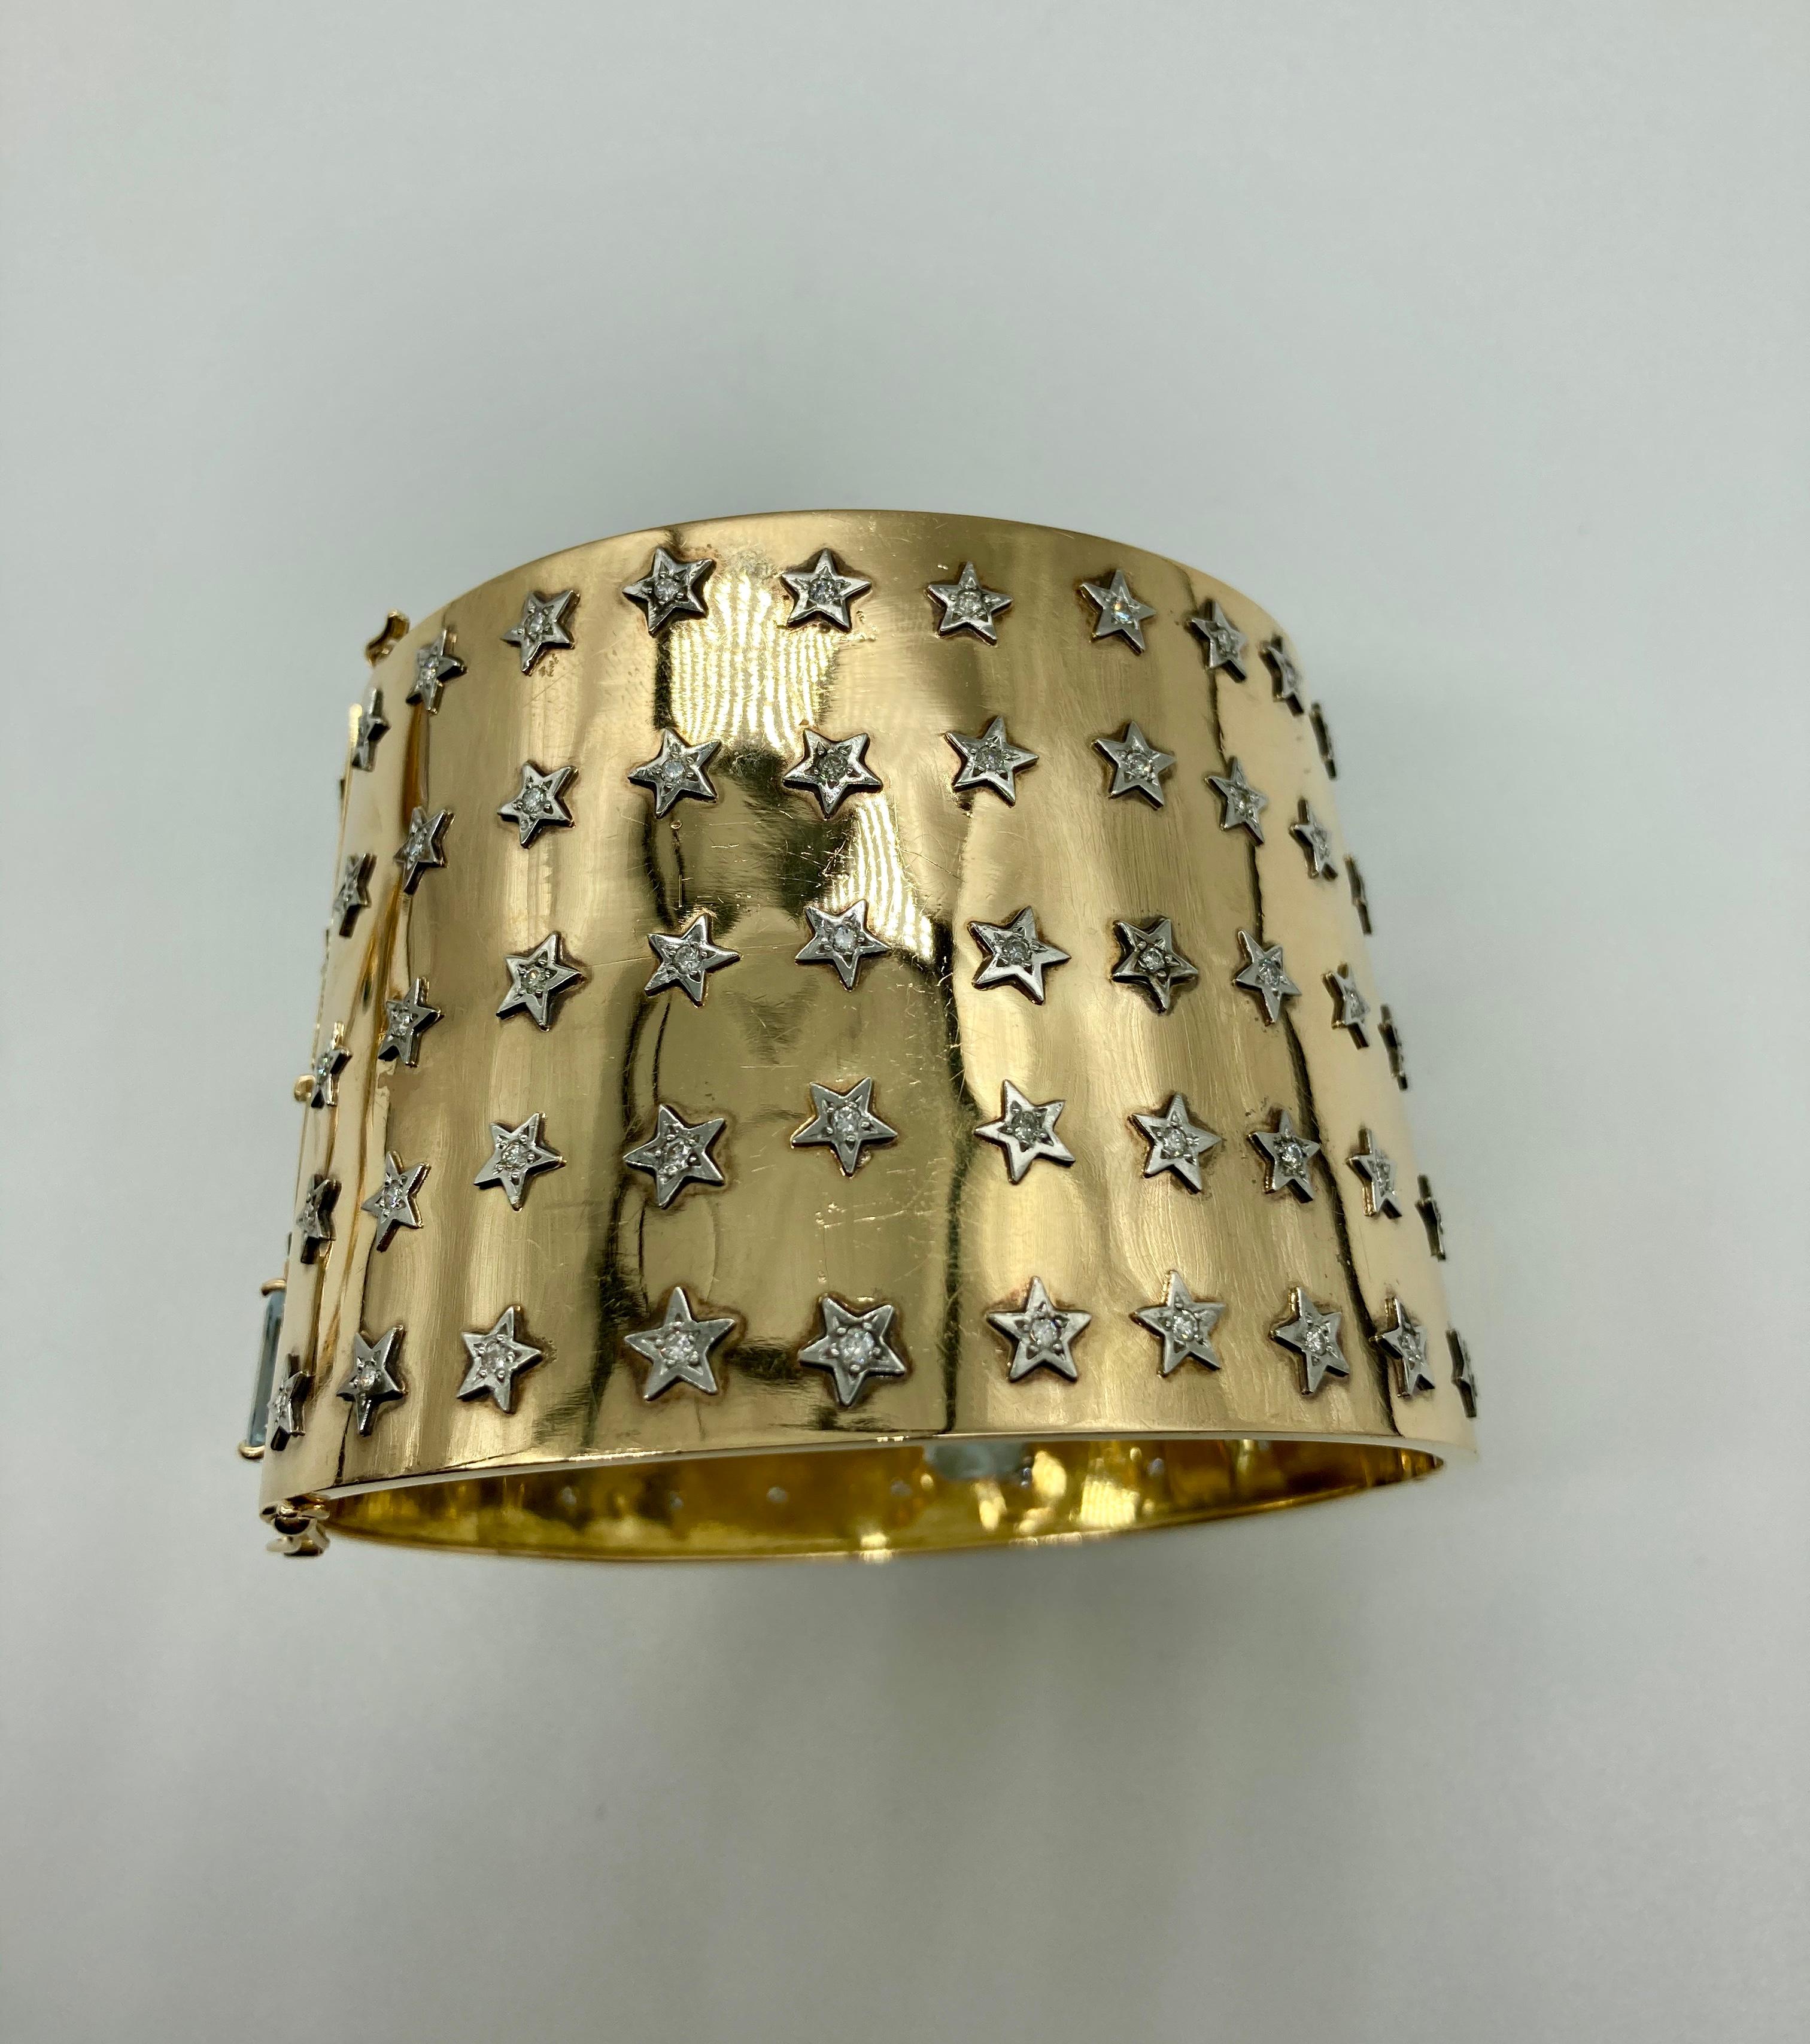 A retro 18 karat gold cuff bracelet embellished with diamond stars and accented with aquamarines. Circa 1940s, marked 750. Approximately 2.1 inches wide, inner circumference 8 inches.